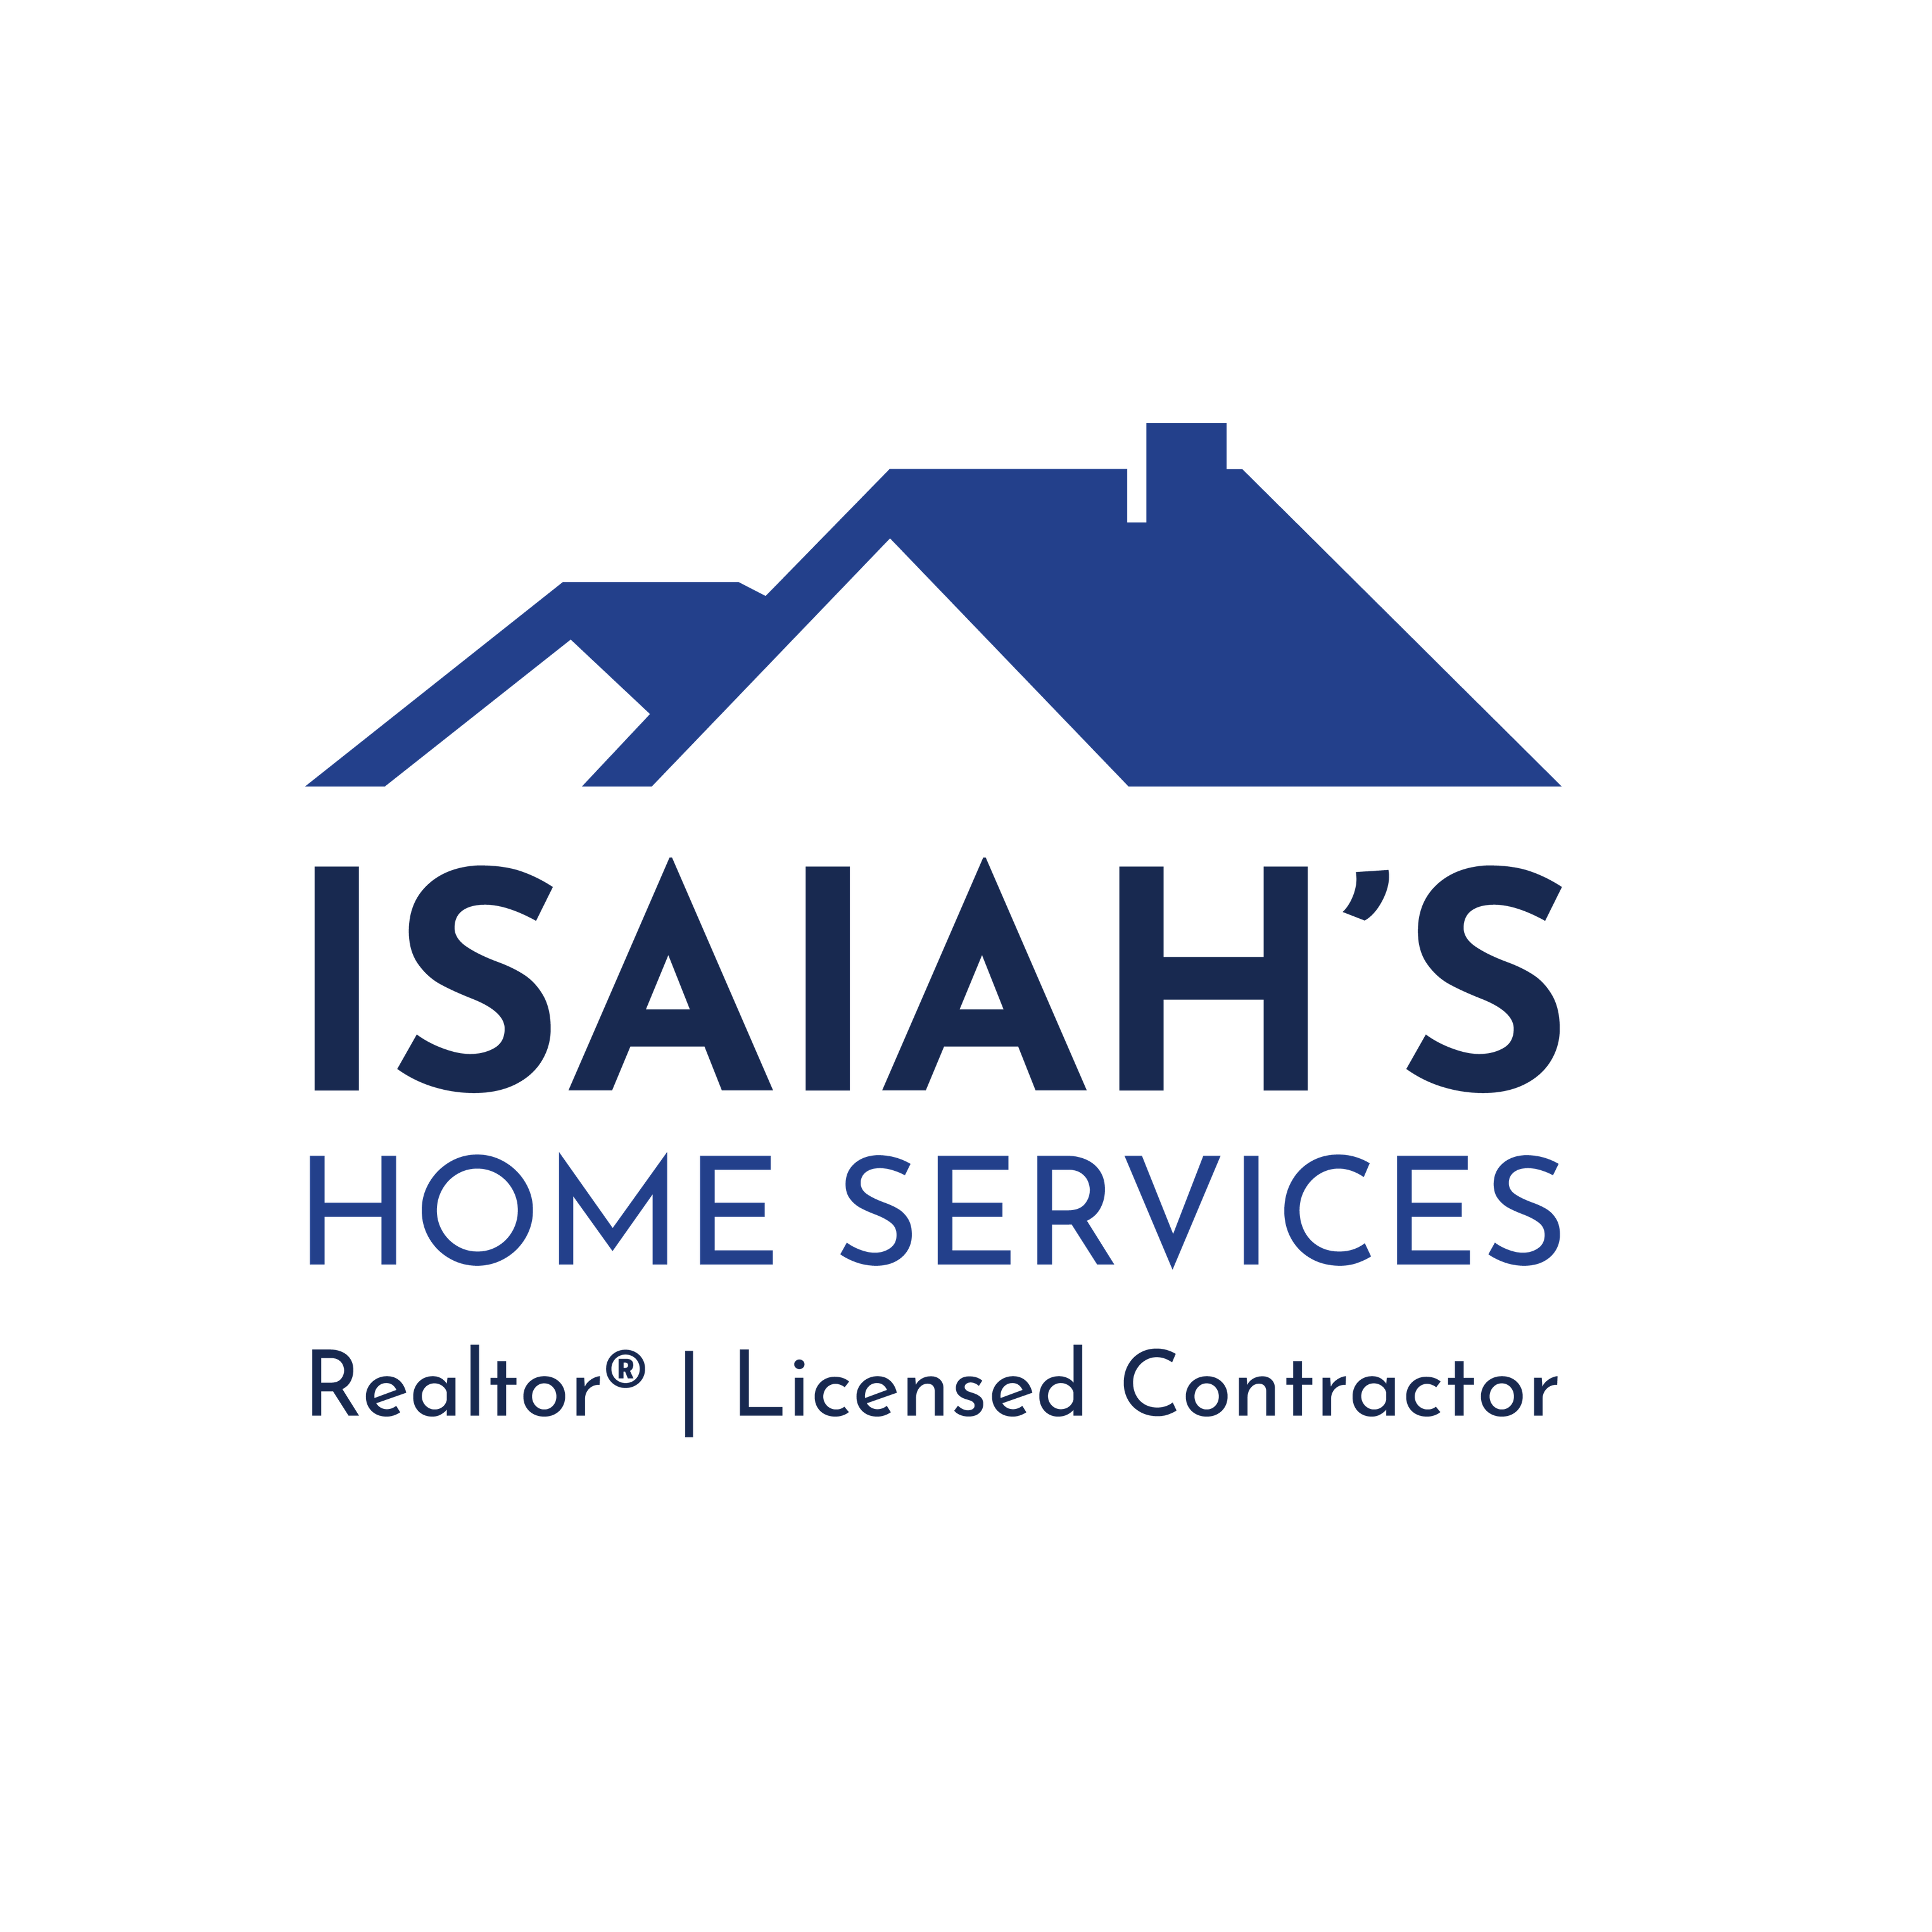 Isaiah's Home Services